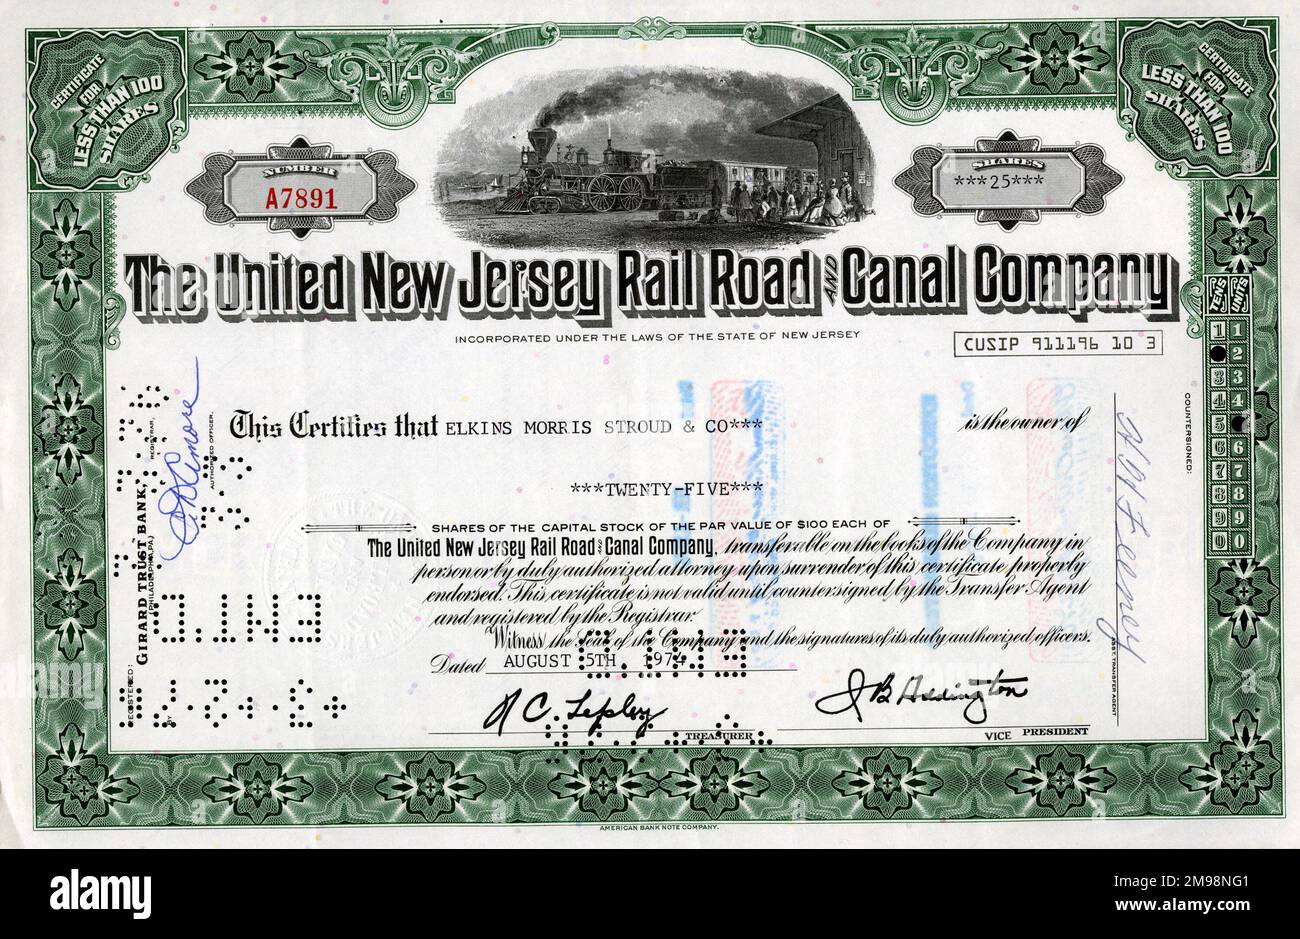 Aktienzertifikat - The United New Jersey Rail Road and Canal Company, 25 Aktien. Stockfoto